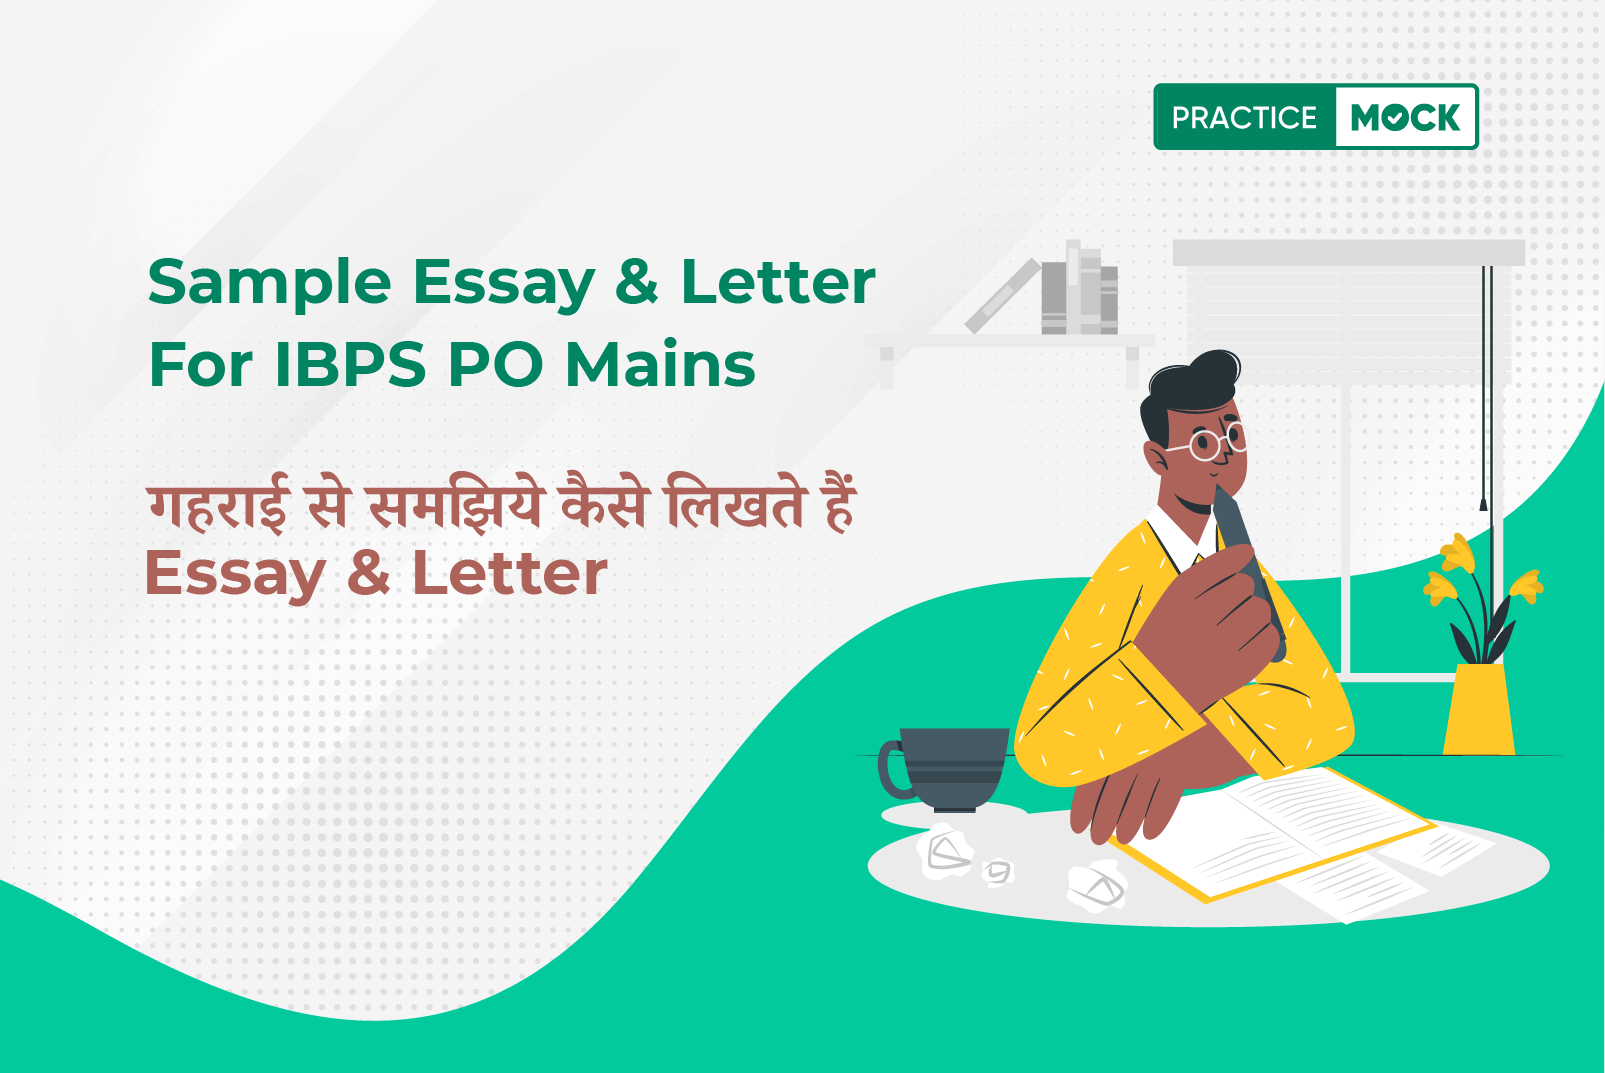 Sample Essay and Letter for IBPS PO Mains